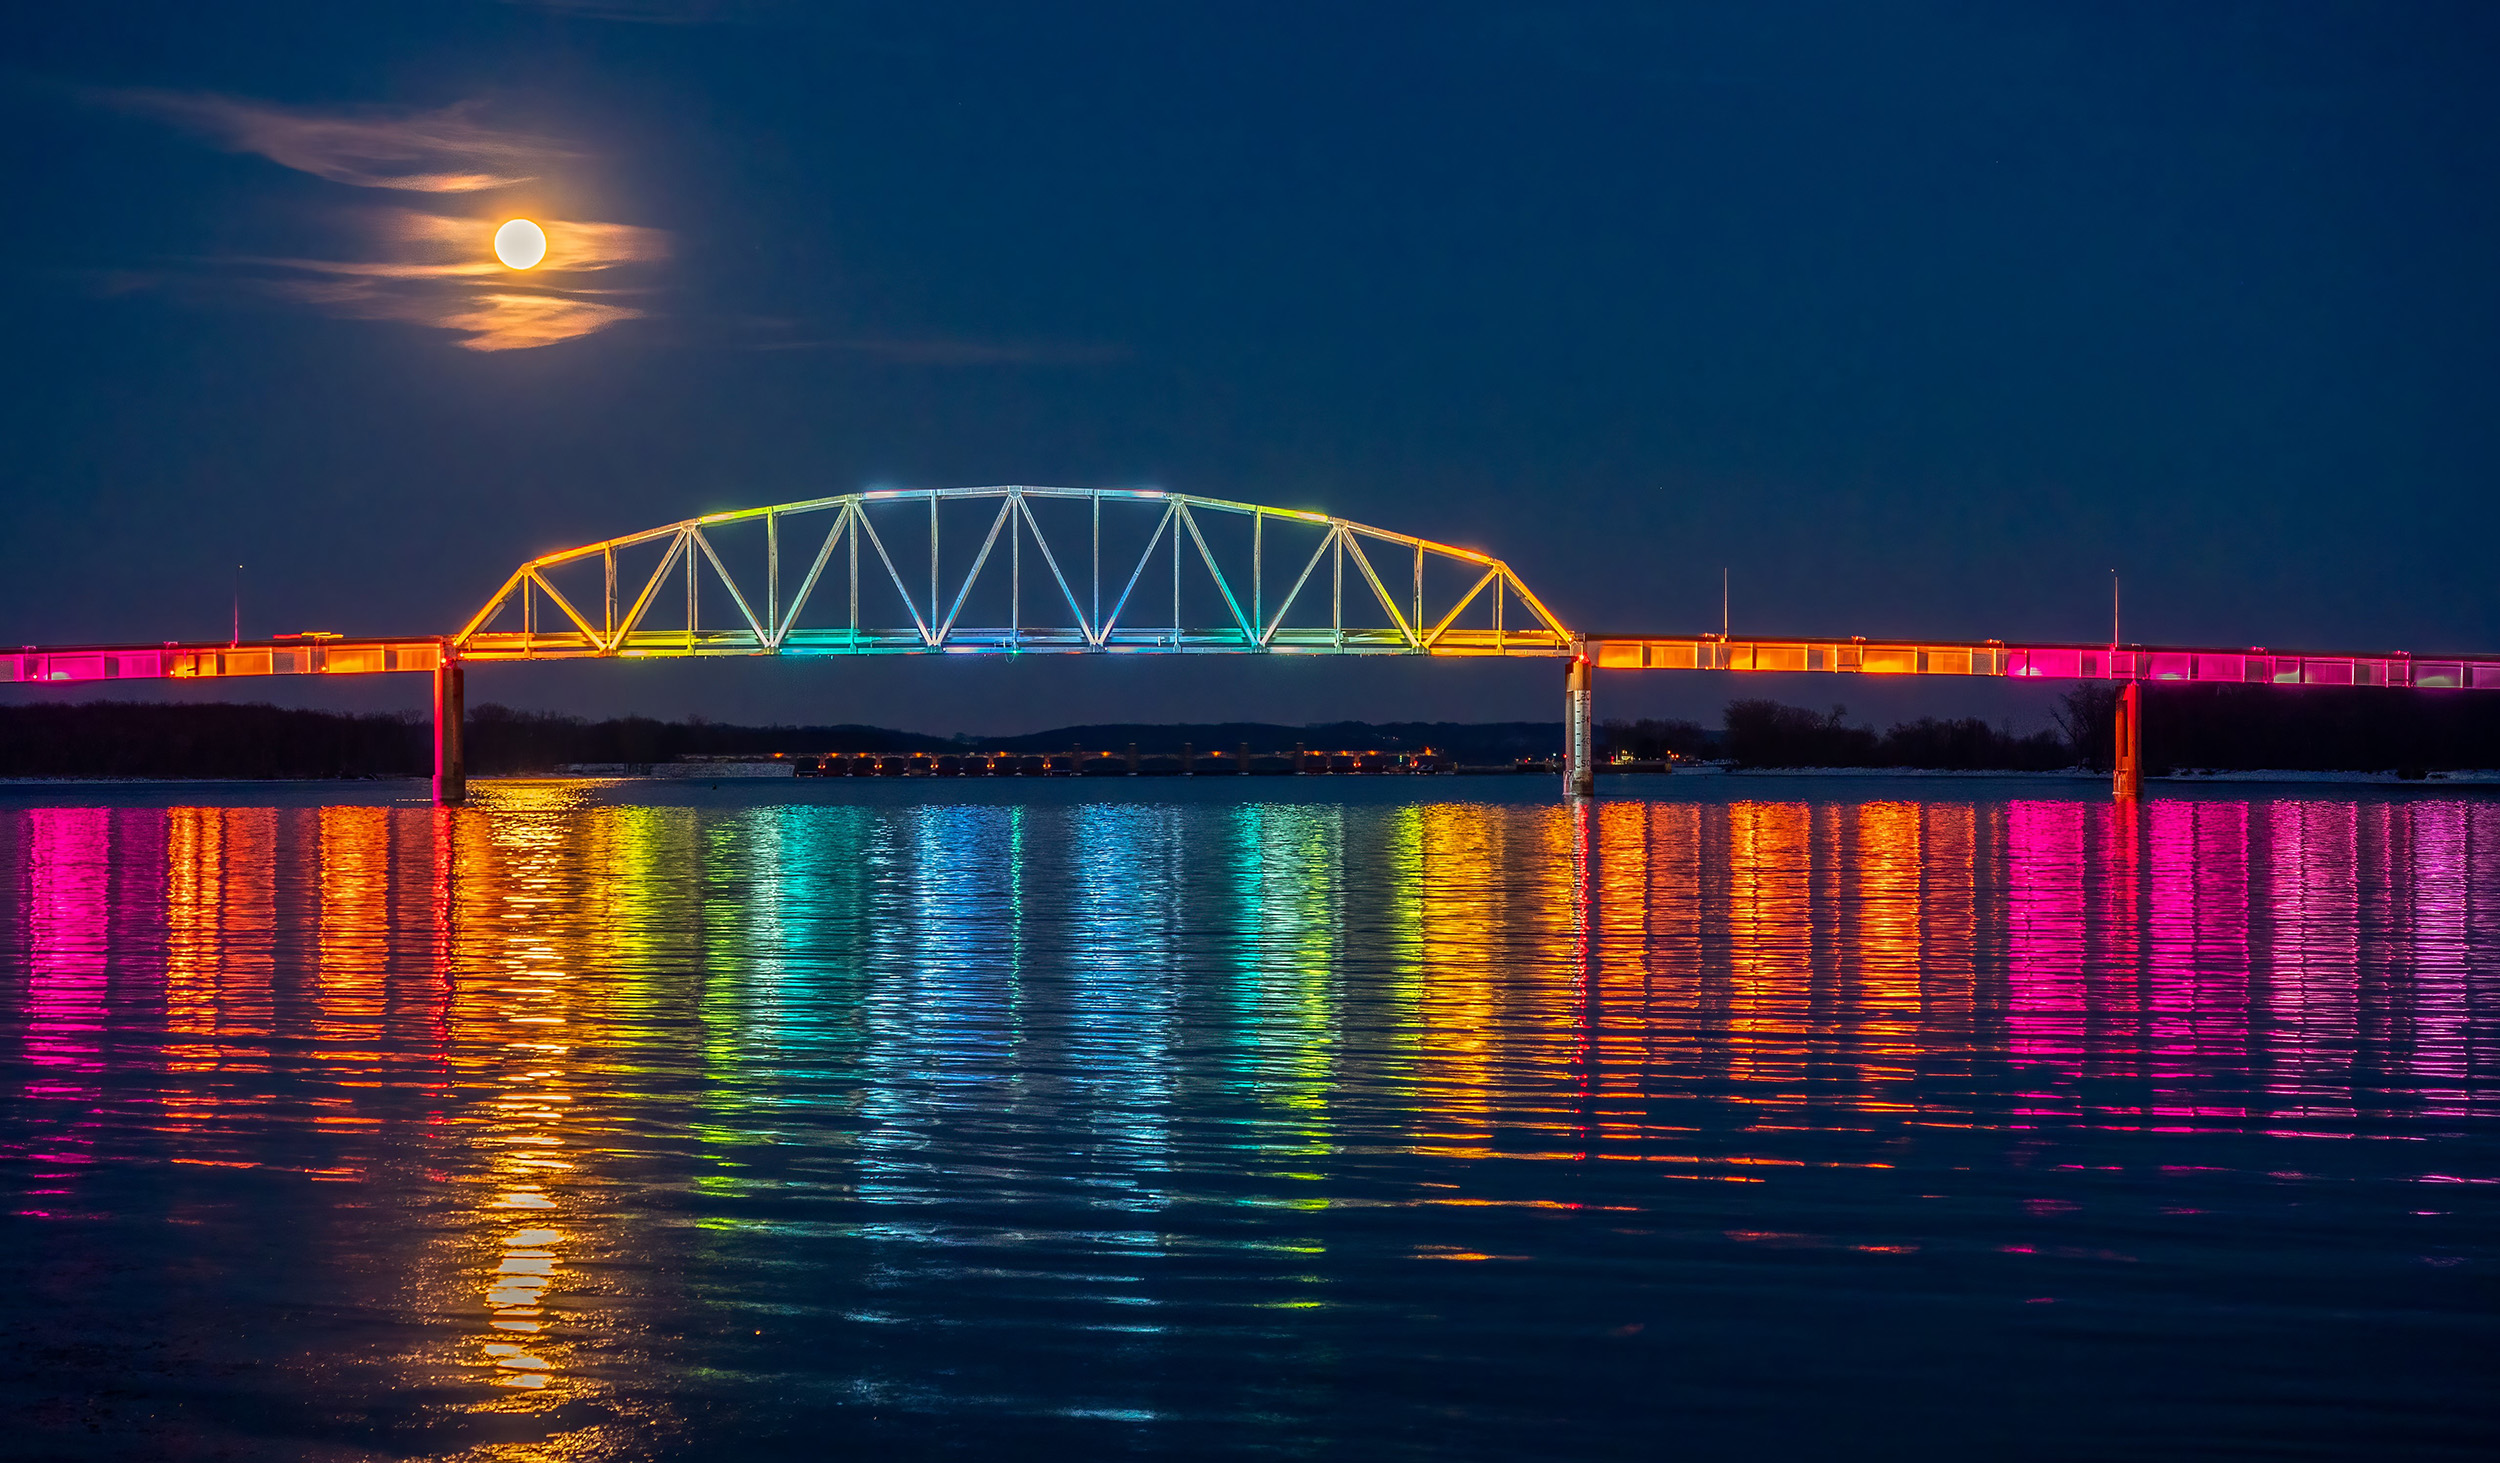 Bridge in Muscatine Iowa lit up with rainbow colors under a full moon